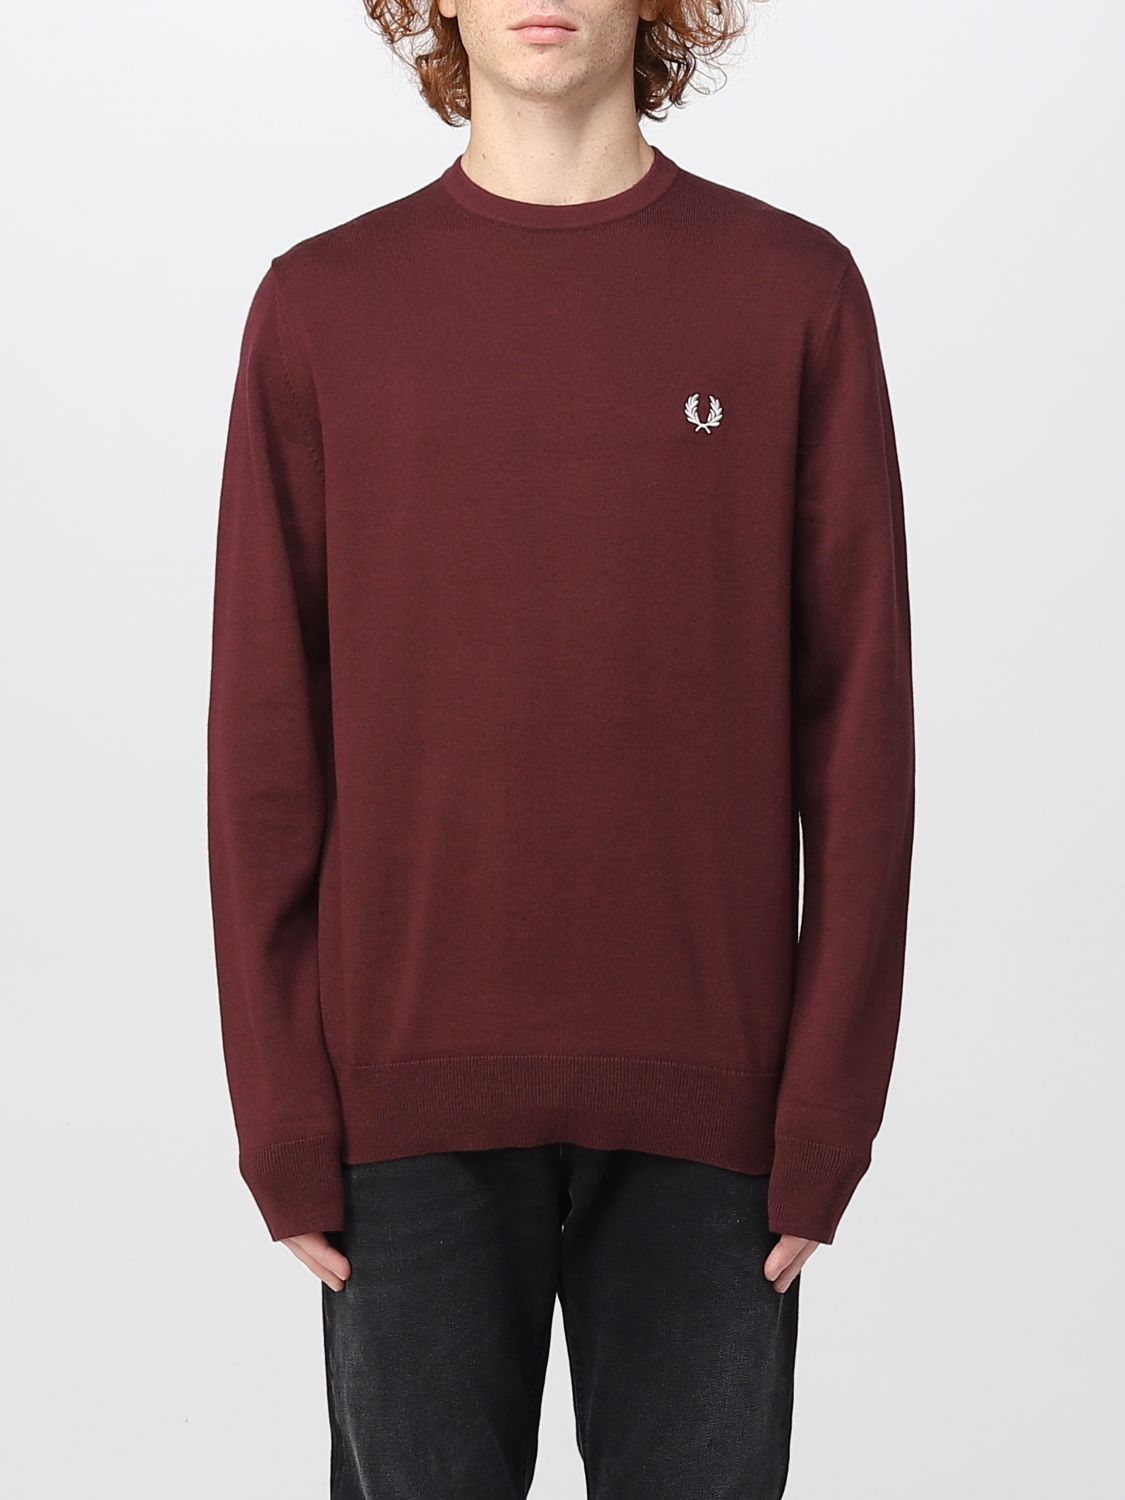 Jumper Fred Perry: Fred Perry jumper for men burgundy 1